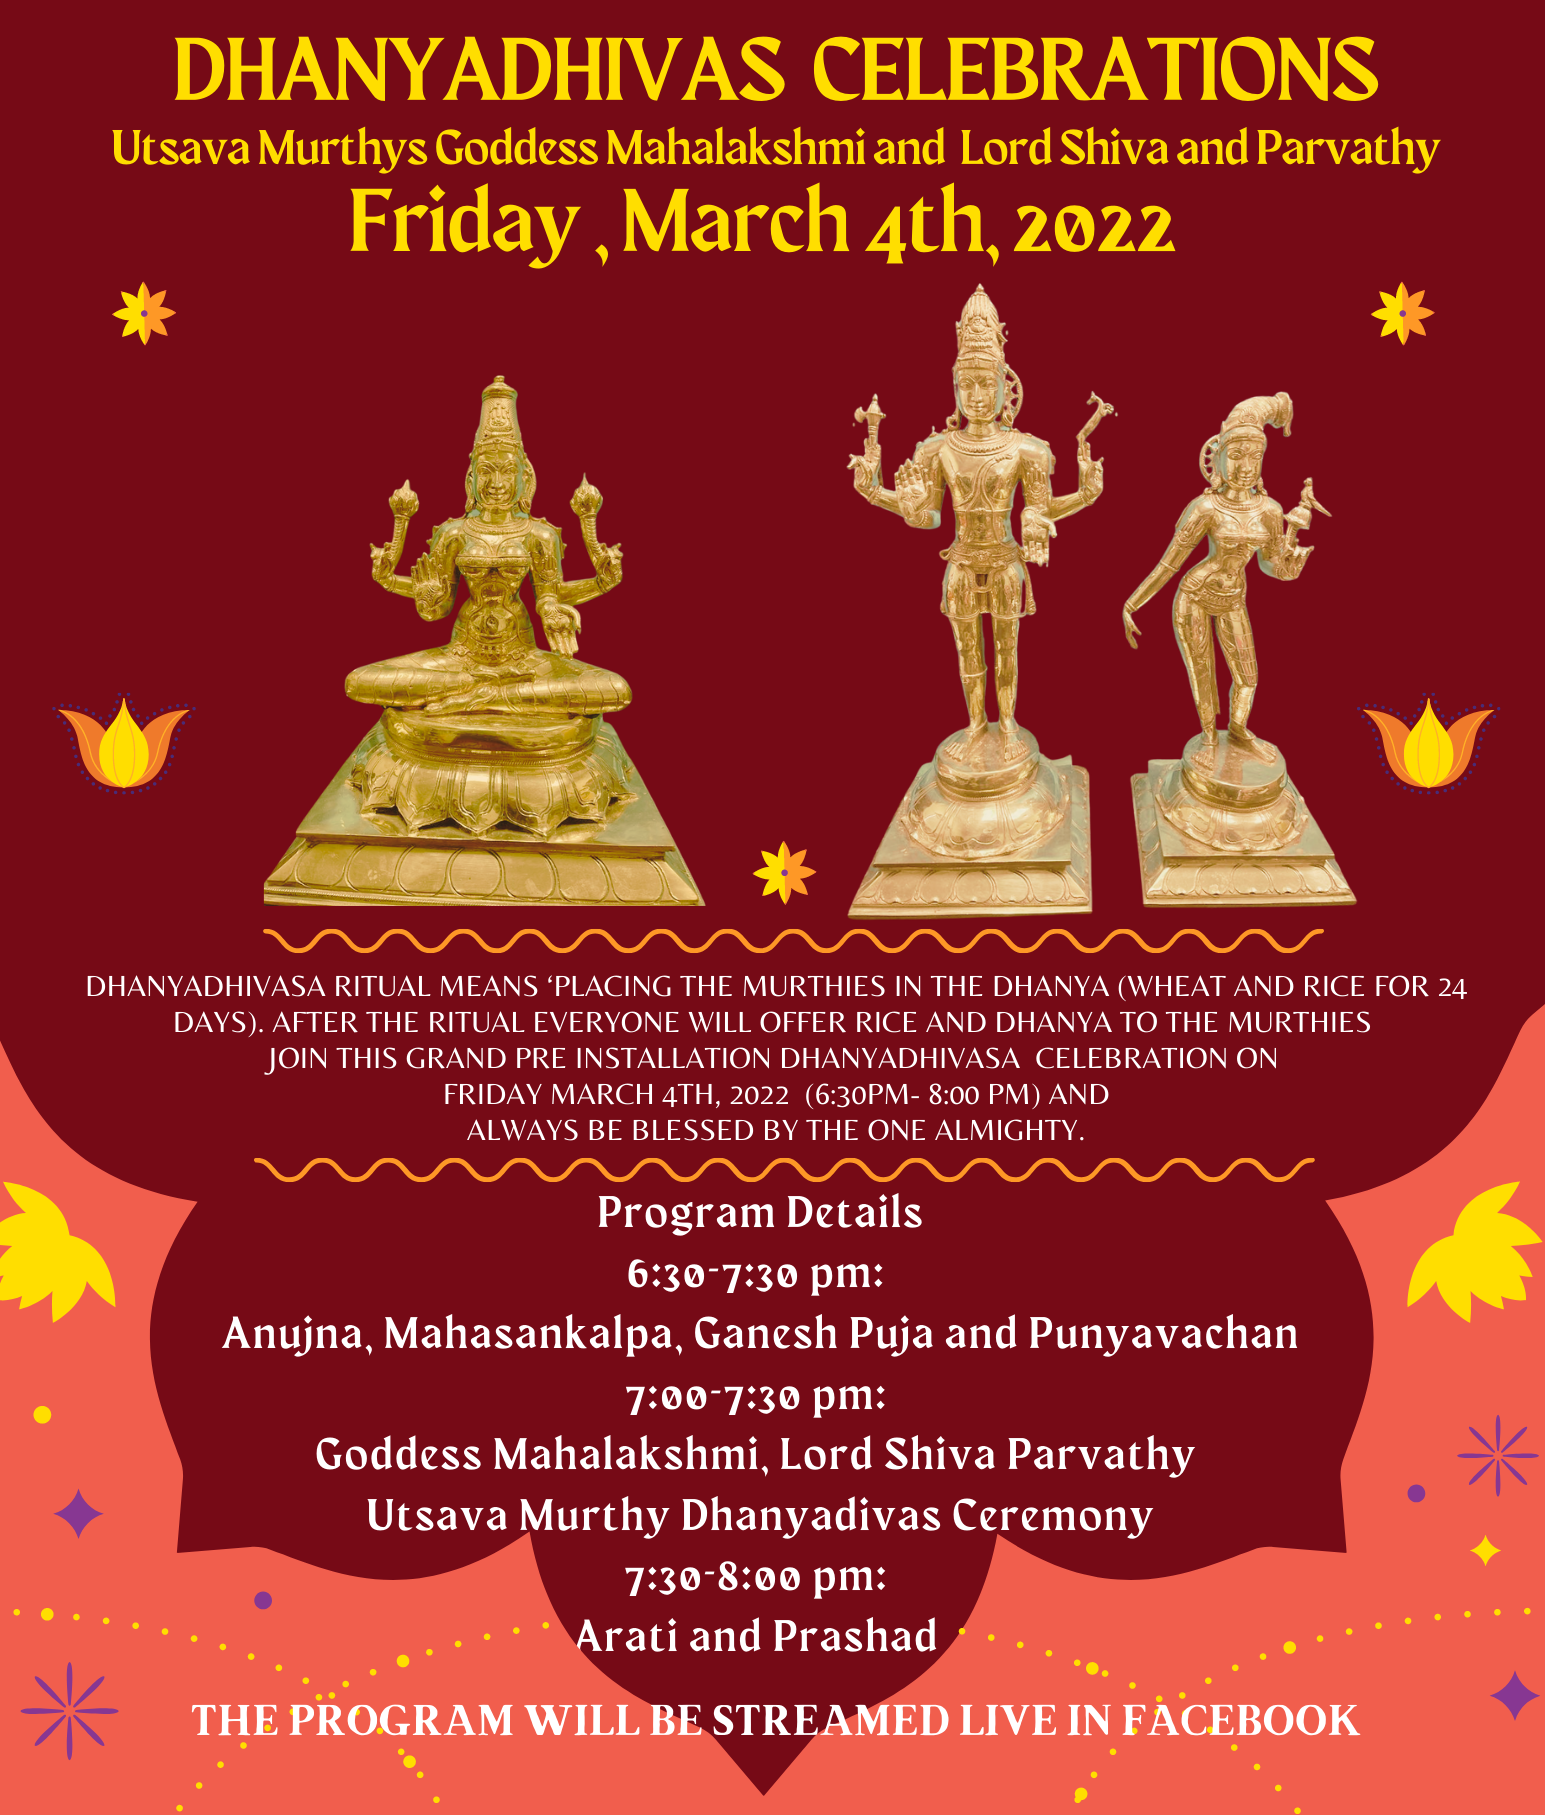 Hindu Society of North East Florida 4968, Greenland road, Jacksonville, Florida. 32258 DHANYADHIVAS CELEBRATIONS Utsava Murthys Coddess Mahalakshmi and Lord Shiva and Parvathy Friday,March 4th, 2022 DHANYADHIVASA RITUAL MEANS 'PLACING THE MURTHIES IN THE DHANYA (WHEAT AND RICE FOR 24 DAYS). AFTER THE RITUAL EVERYONE WILL OFFER RICE AND DHANYA TO THE MURTHIES JOIN THIS GRAND PRE INSTALLATION DHANYADHIVASA CELEBRATION ON FRIDAY MARCH 4TH, 2022 (6:30PM- 8:00 PM) AND ALWAYS BE BLESSED BY THE ONE ALMIGHTY. Program Details 6:30-7:30 pm: Anujna, Mahasankalpa, Canesh Puja and Punyavachan 7:00-7:30 pm: Goddess Mahalakshmi, Lord Shiva Parvathy Utsava Murthy Dhanyadivas Ceremony 7:30-8:00 pm: Arati and Prashad •0. THE PROGRAM WILL BE STREAMED LIVE IN FACEBOOK